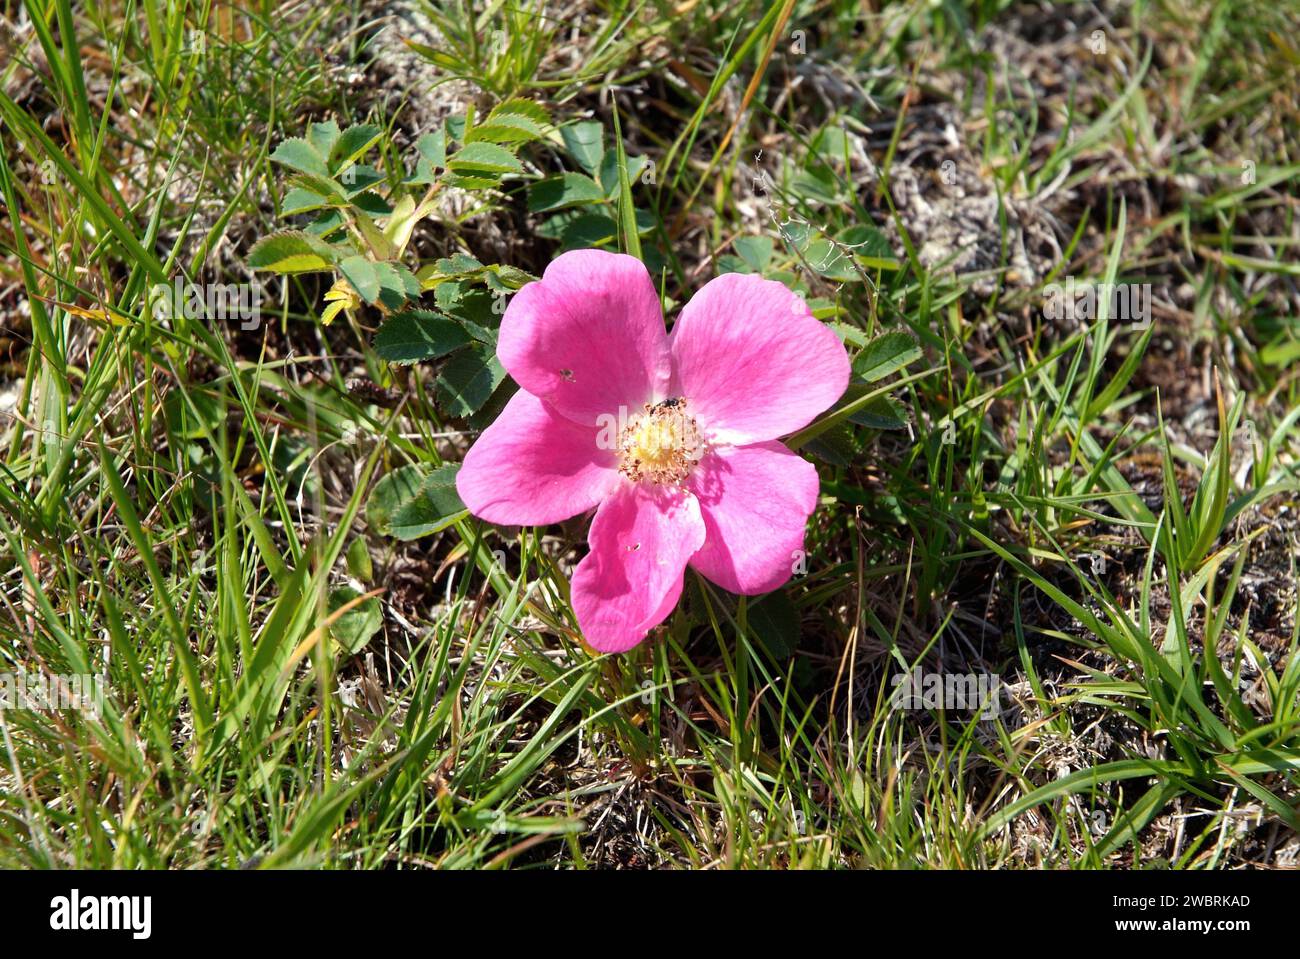 Alpine rose (Rosa pendulina or Rosa alpina pendulina) is a deciduous shrub native to central and south Europe mountains. This photo was taken in Valle Stock Photo